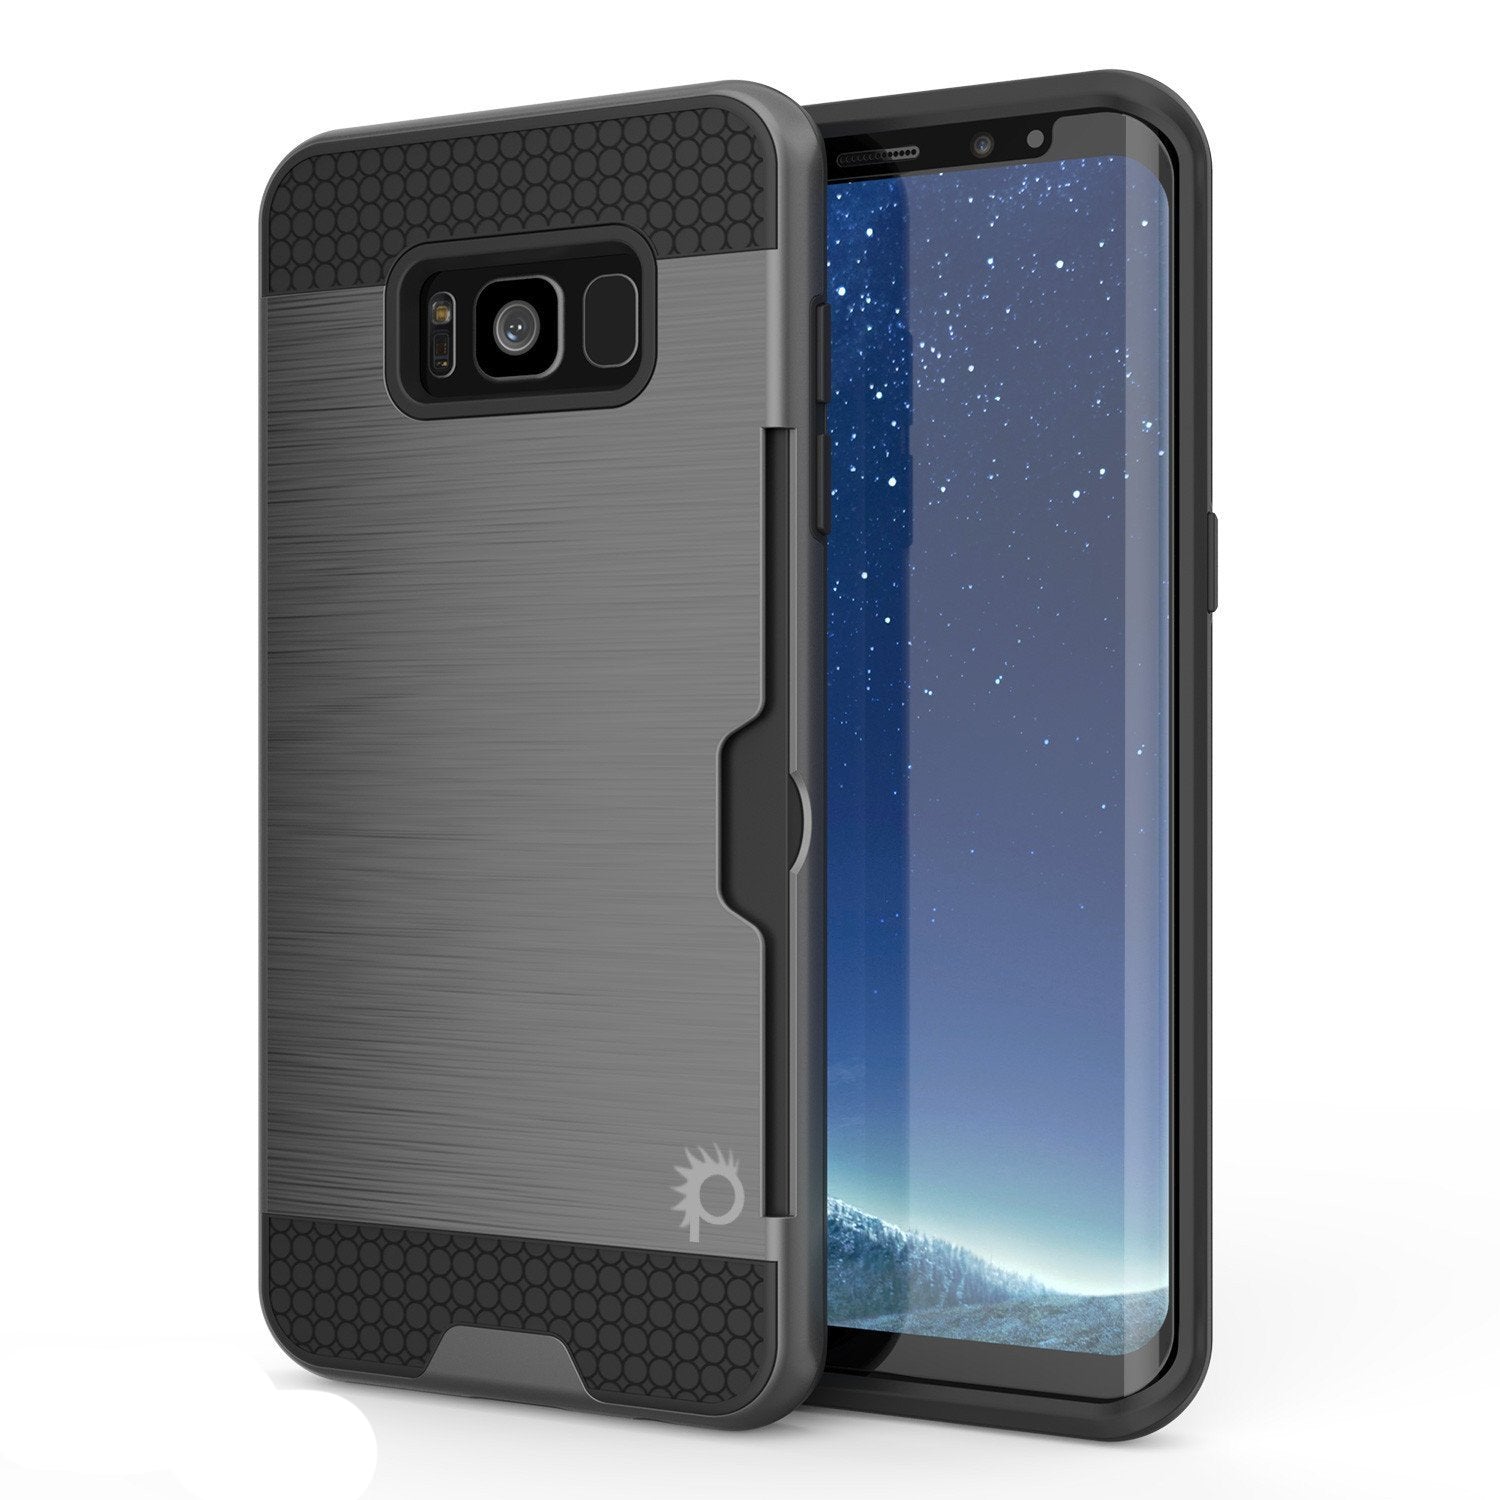 Galaxy S8 Plus Punkcase SLOT Series Dual-Layer Armor Cover, Grey